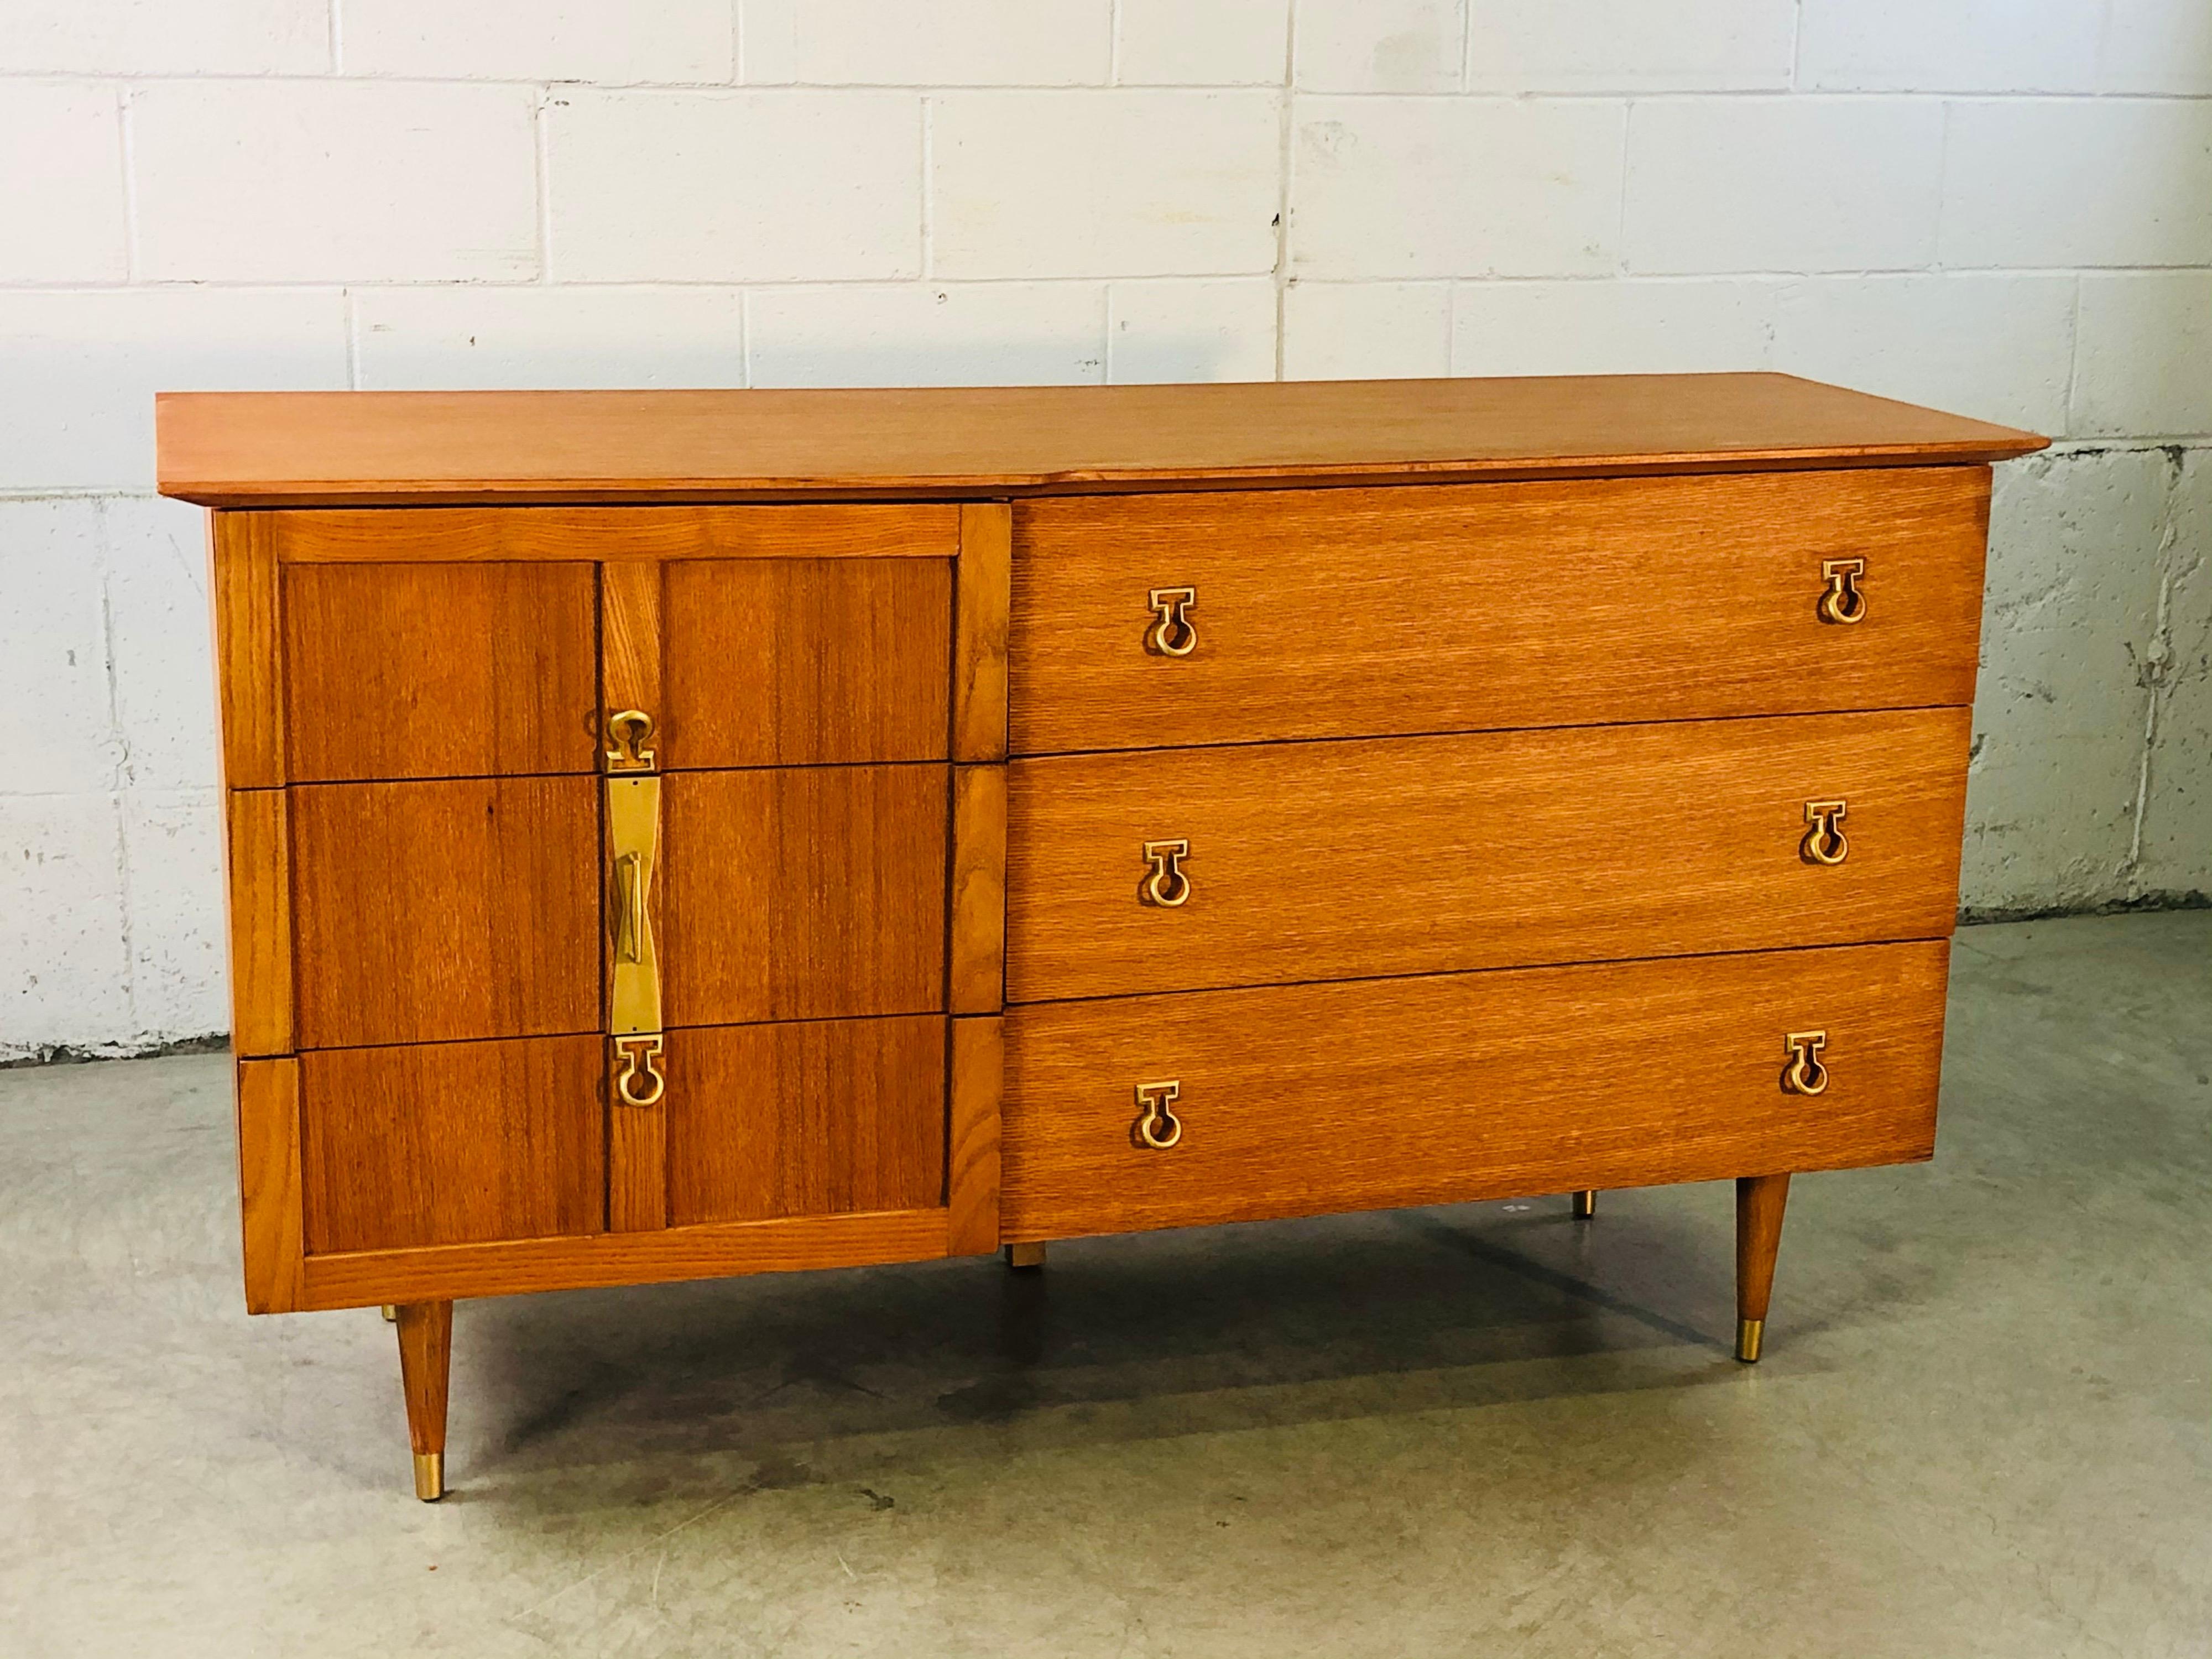 Vintage 1960s oak wood six drawer dresser by Basic-Witz. The dresser has brass accent pulls and is in newly refinished condition. Marked inside.